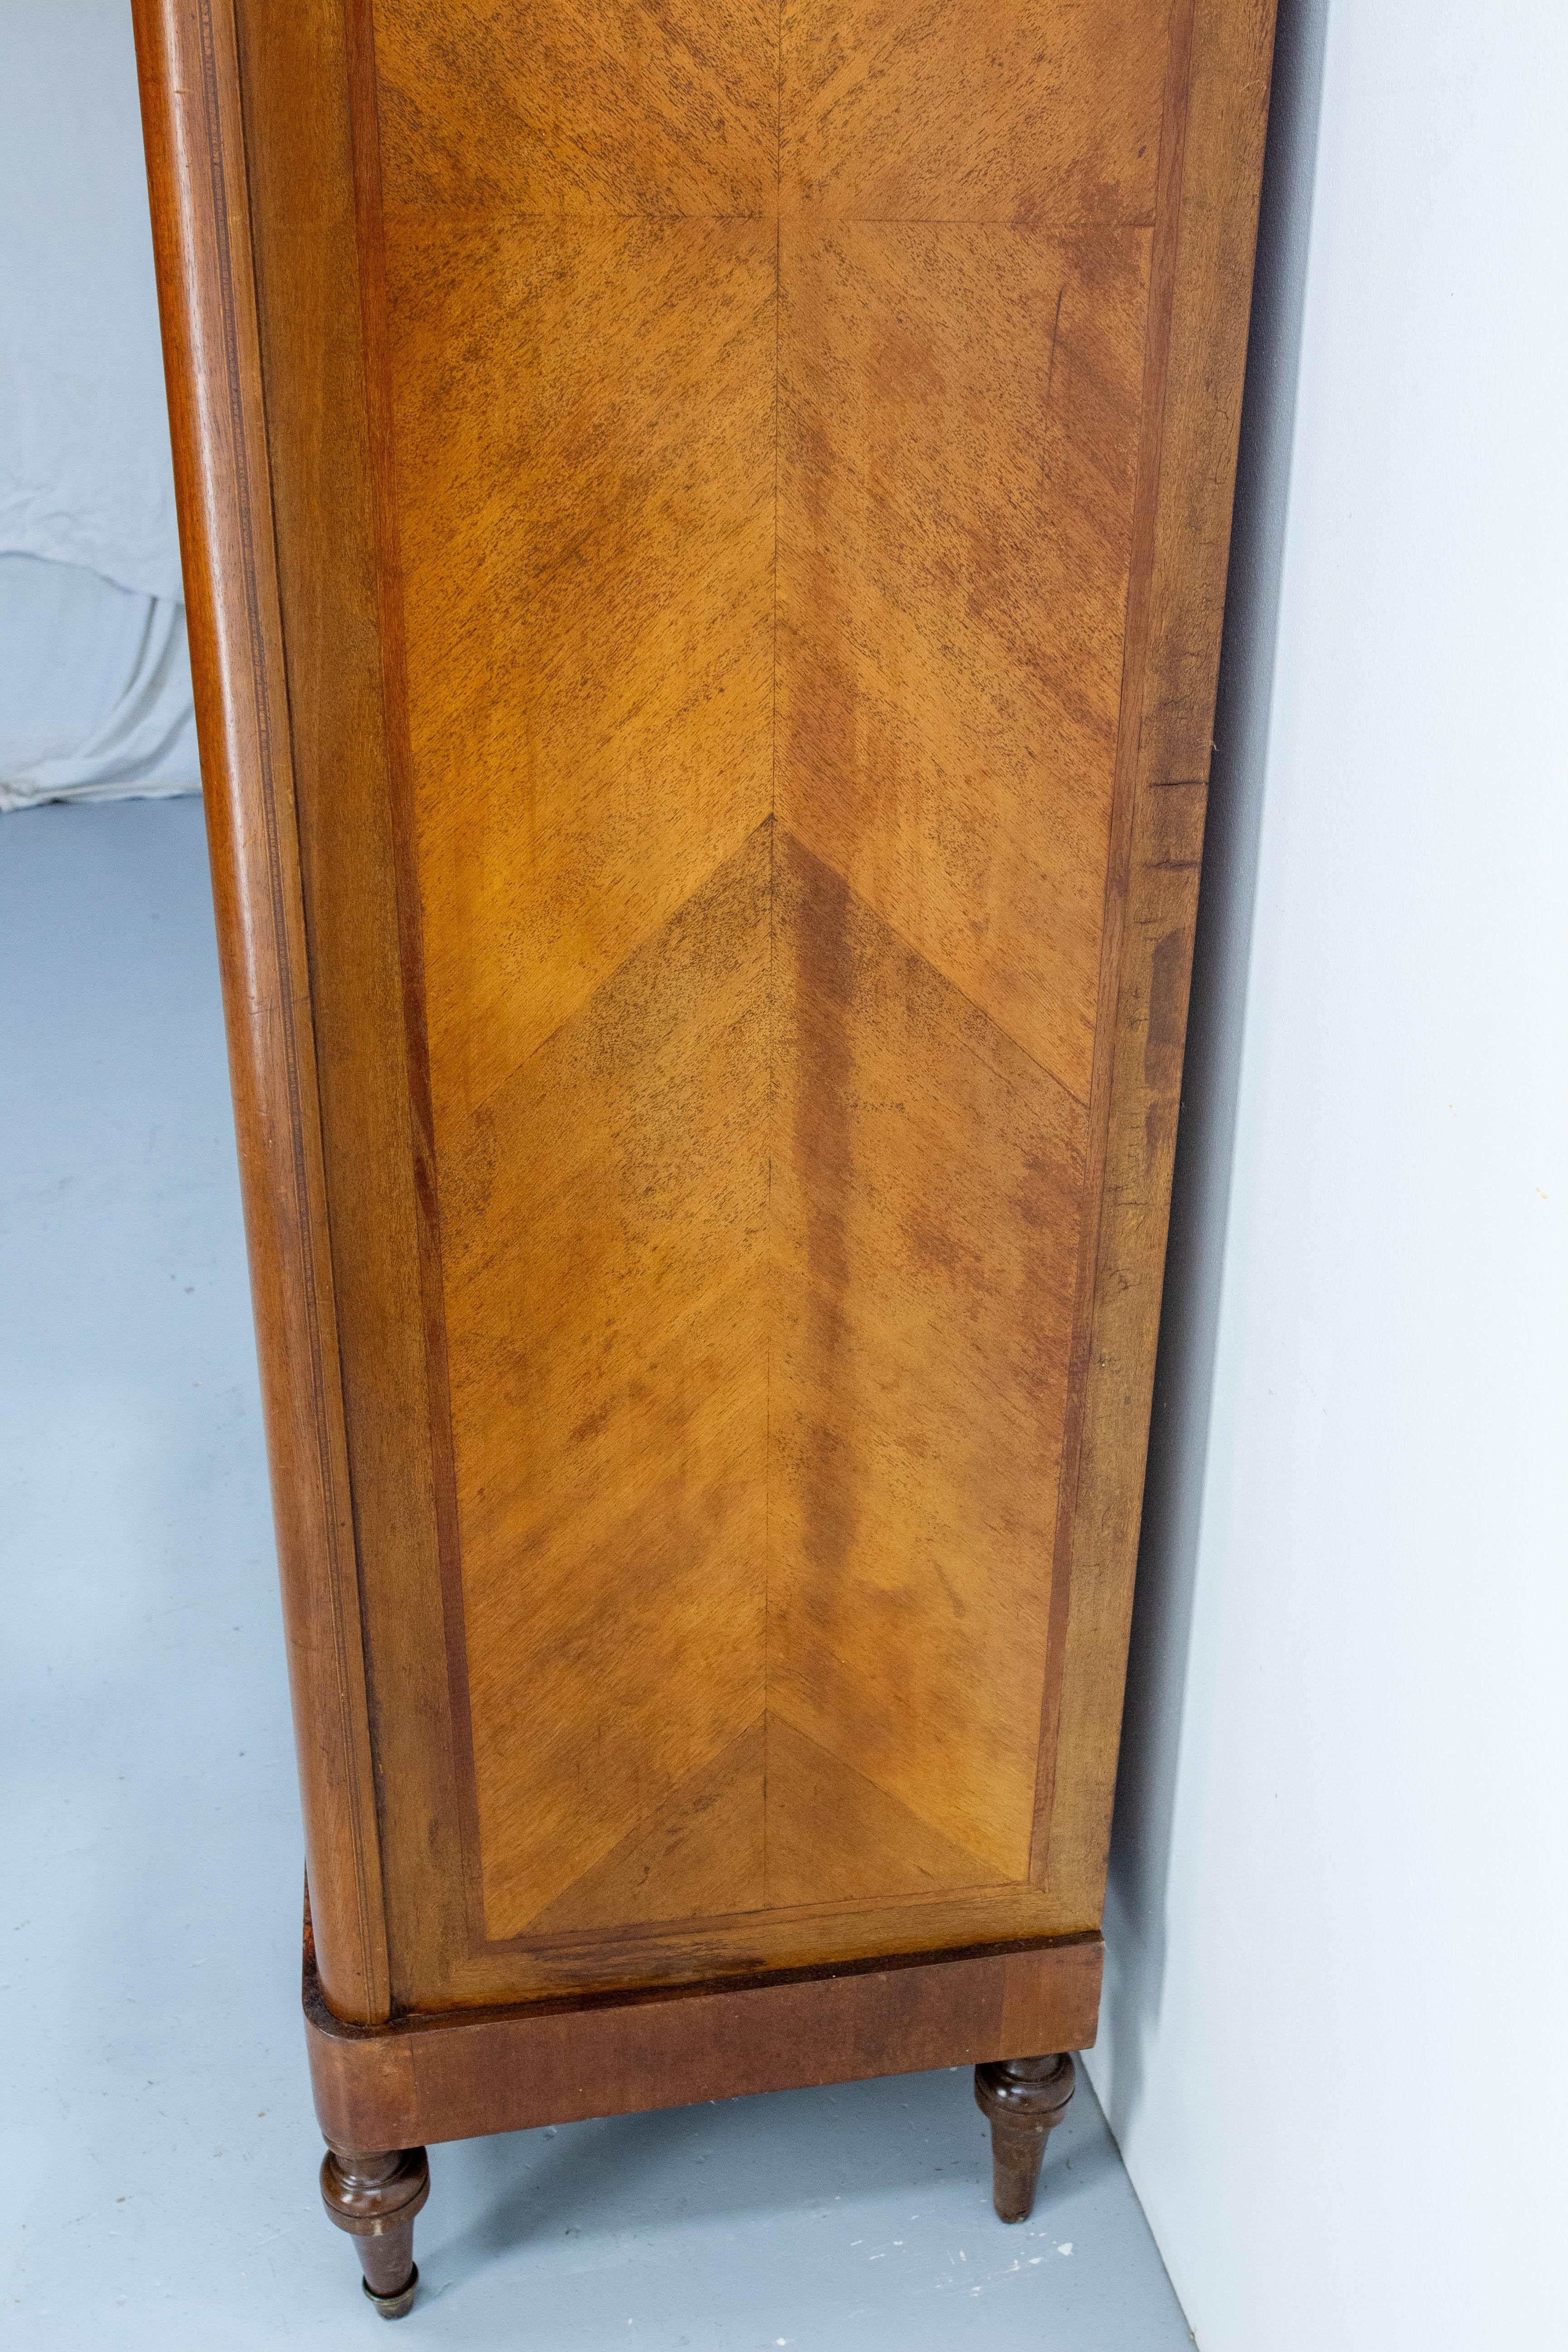 20th Century French Iroko & Brass Armoire Beveled Mirrors in the Louis 16 Revival Style, 1900 For Sale